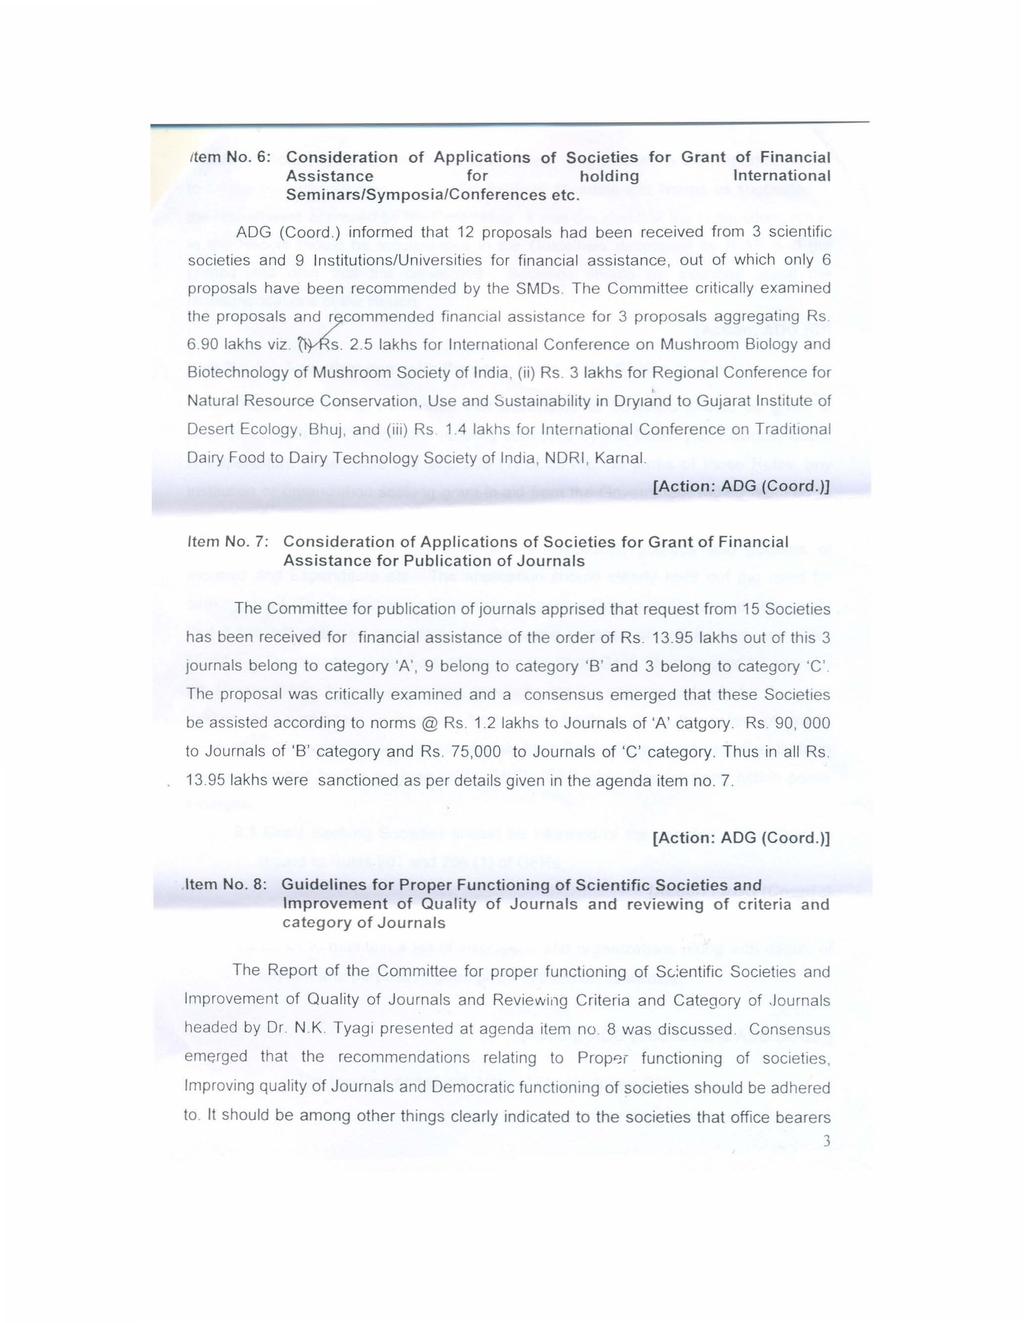 Item No.6: Consideration of Applications of Societies Assistance for holding SeminarslSymposialConferences etc. for Grant of Financial International ADG (Coord.